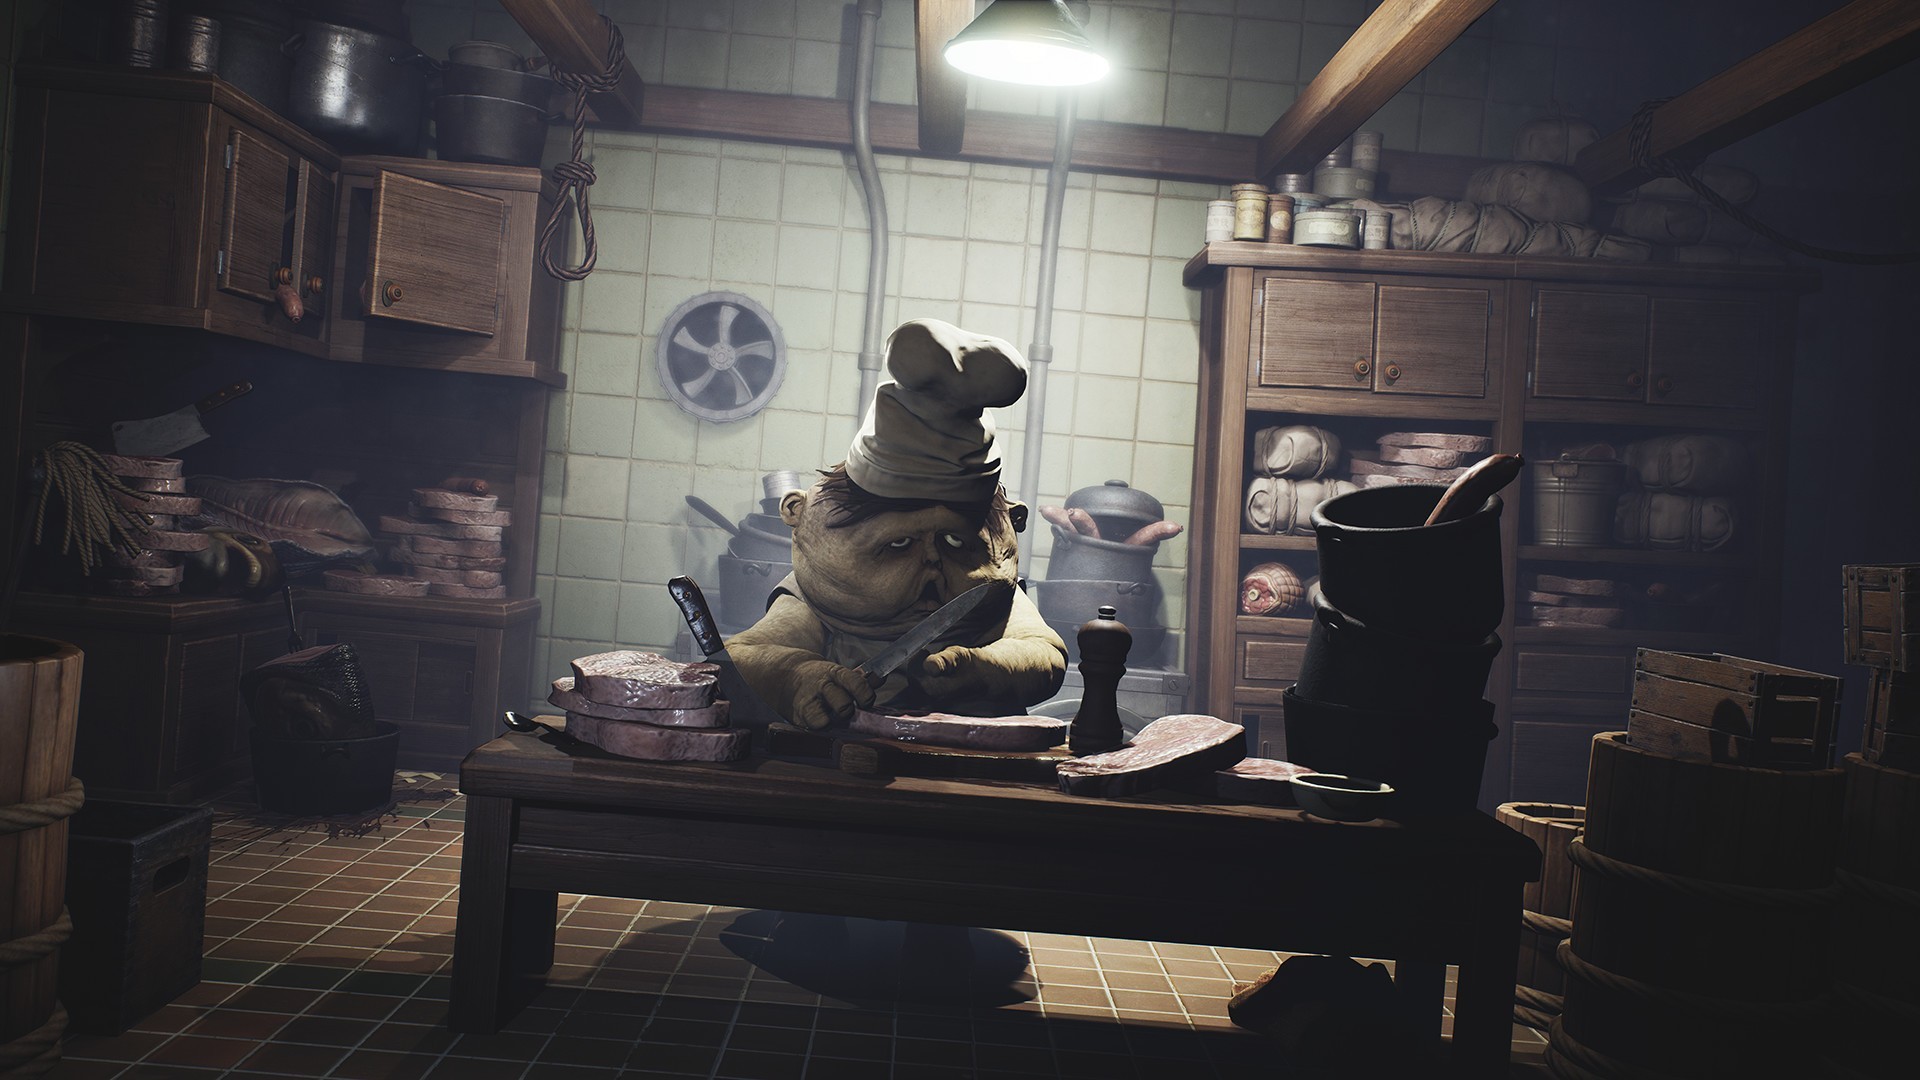 LITTLE NIGHTMARES - Standard Edition [PC Download]